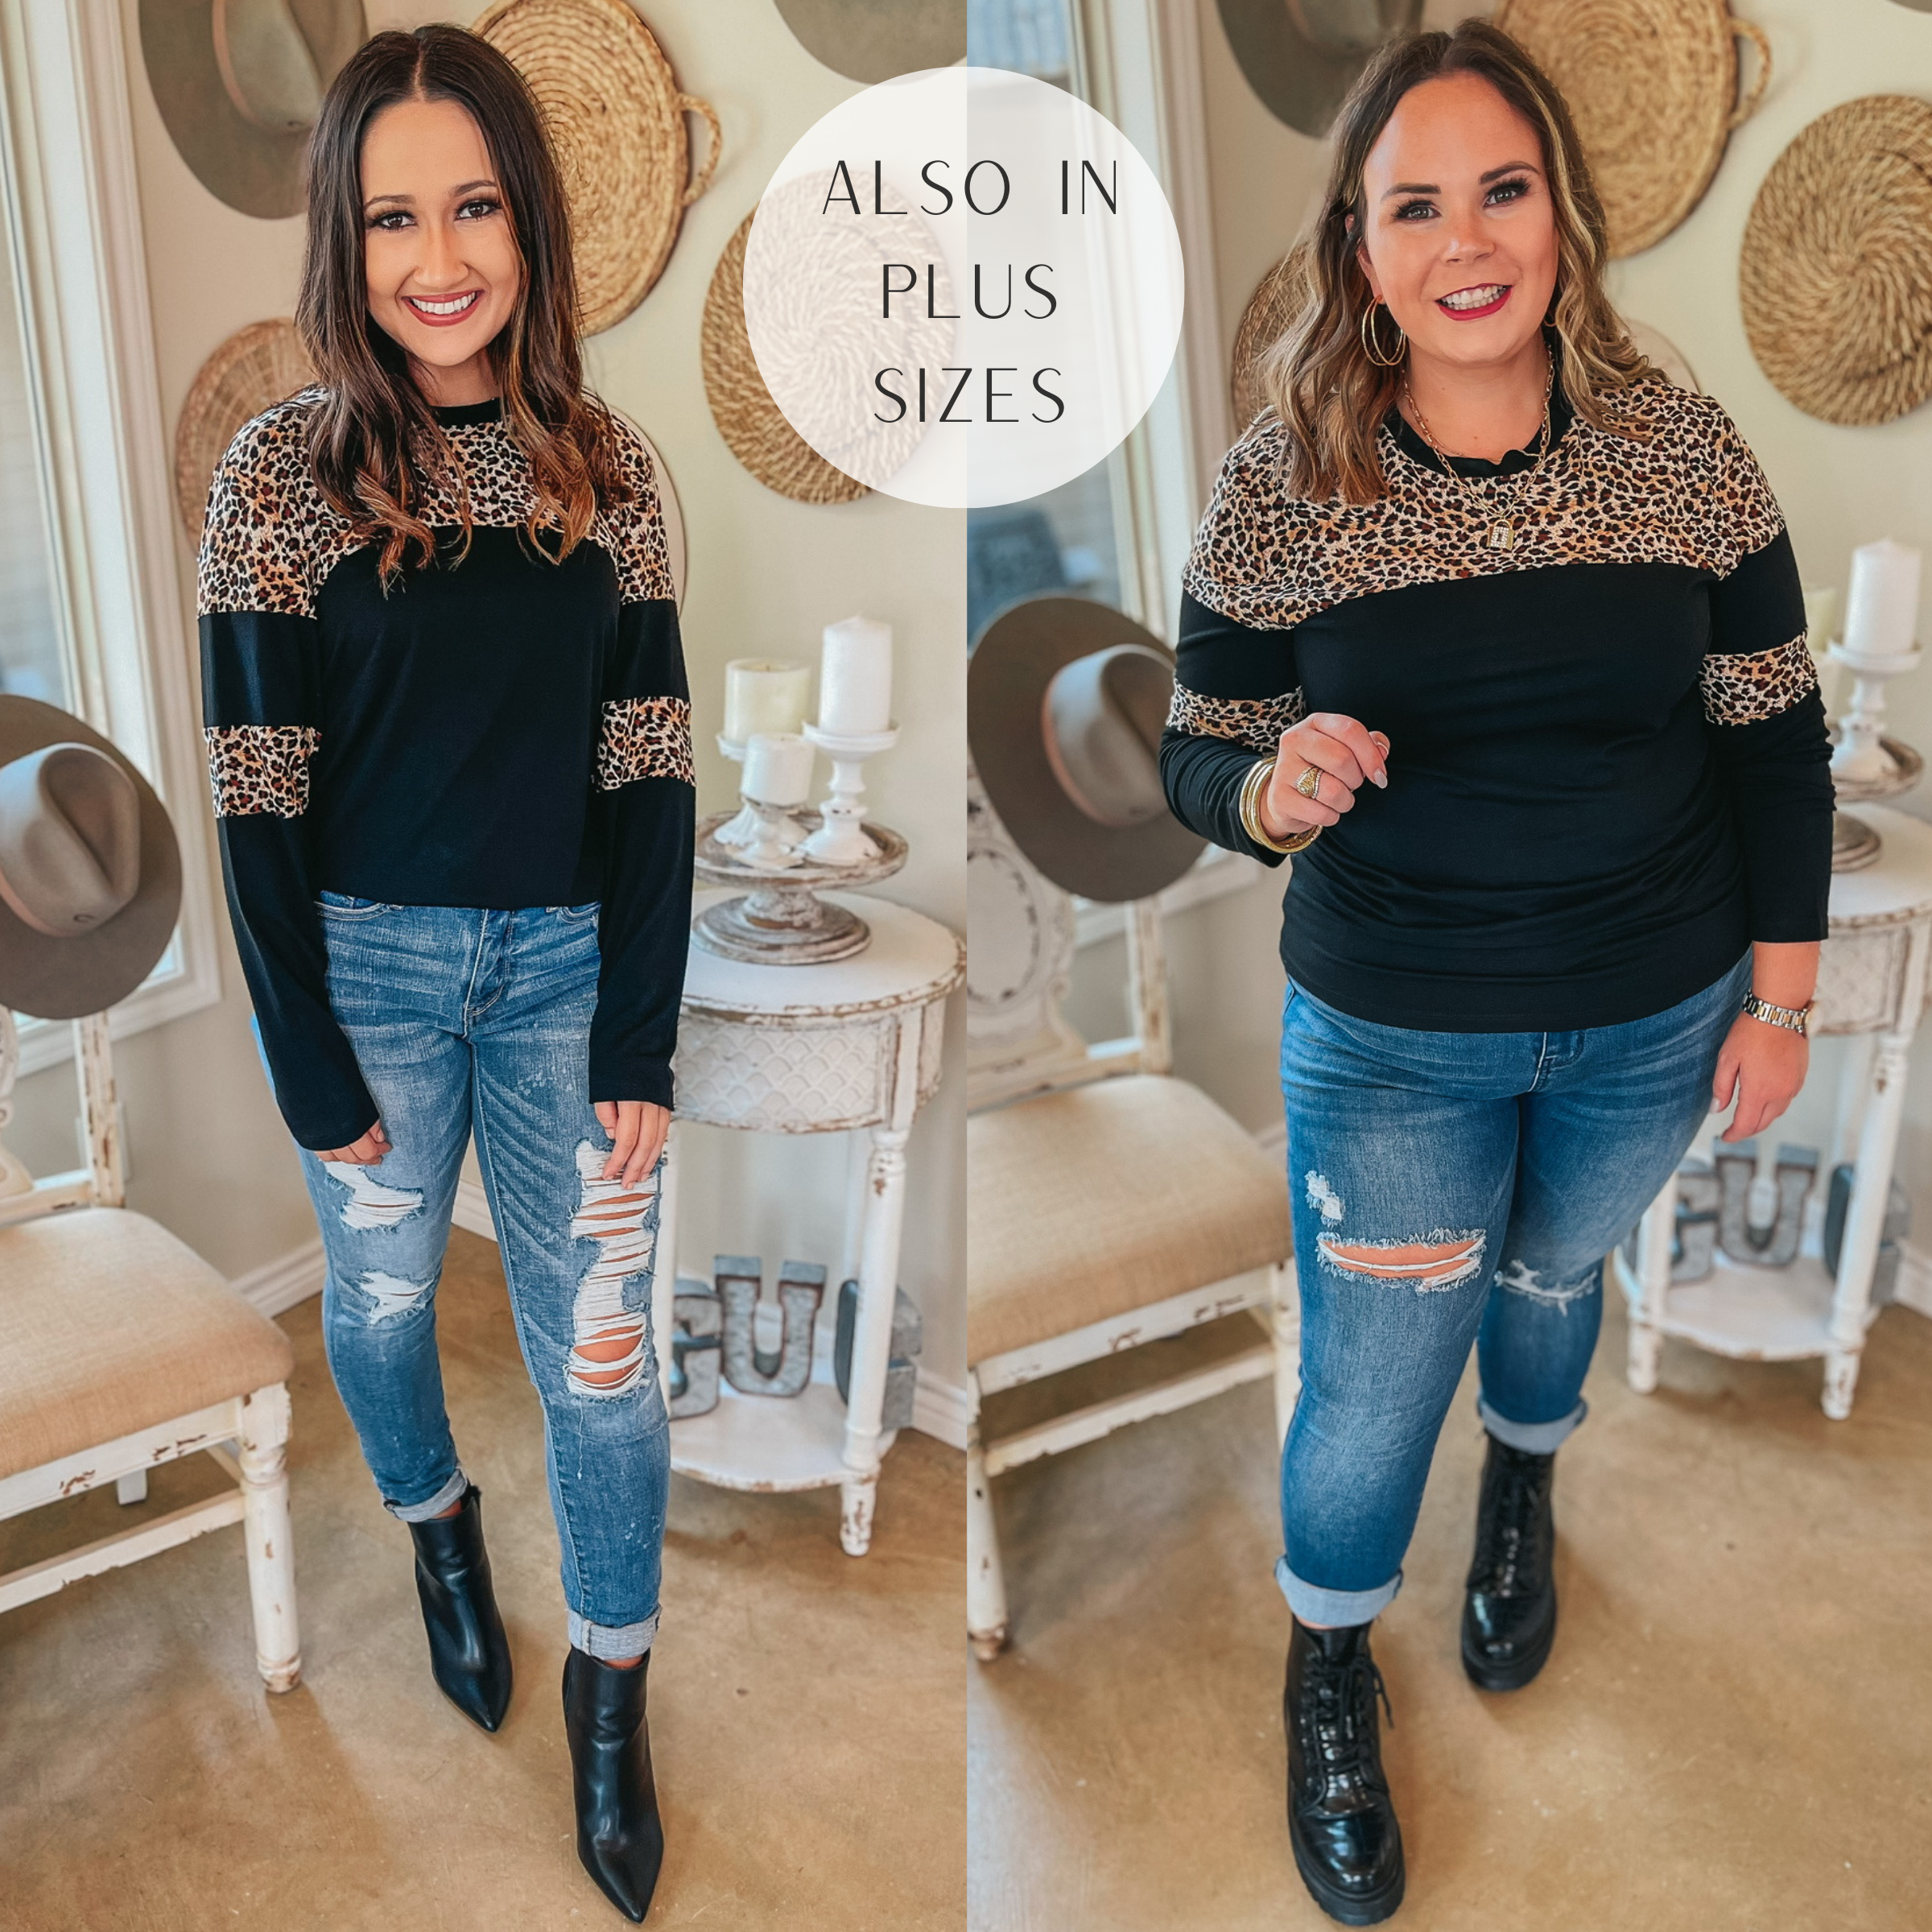 Get the Look Leopard Upper and Elbow Long Sleeve Top in Black - Giddy Up Glamour Boutique